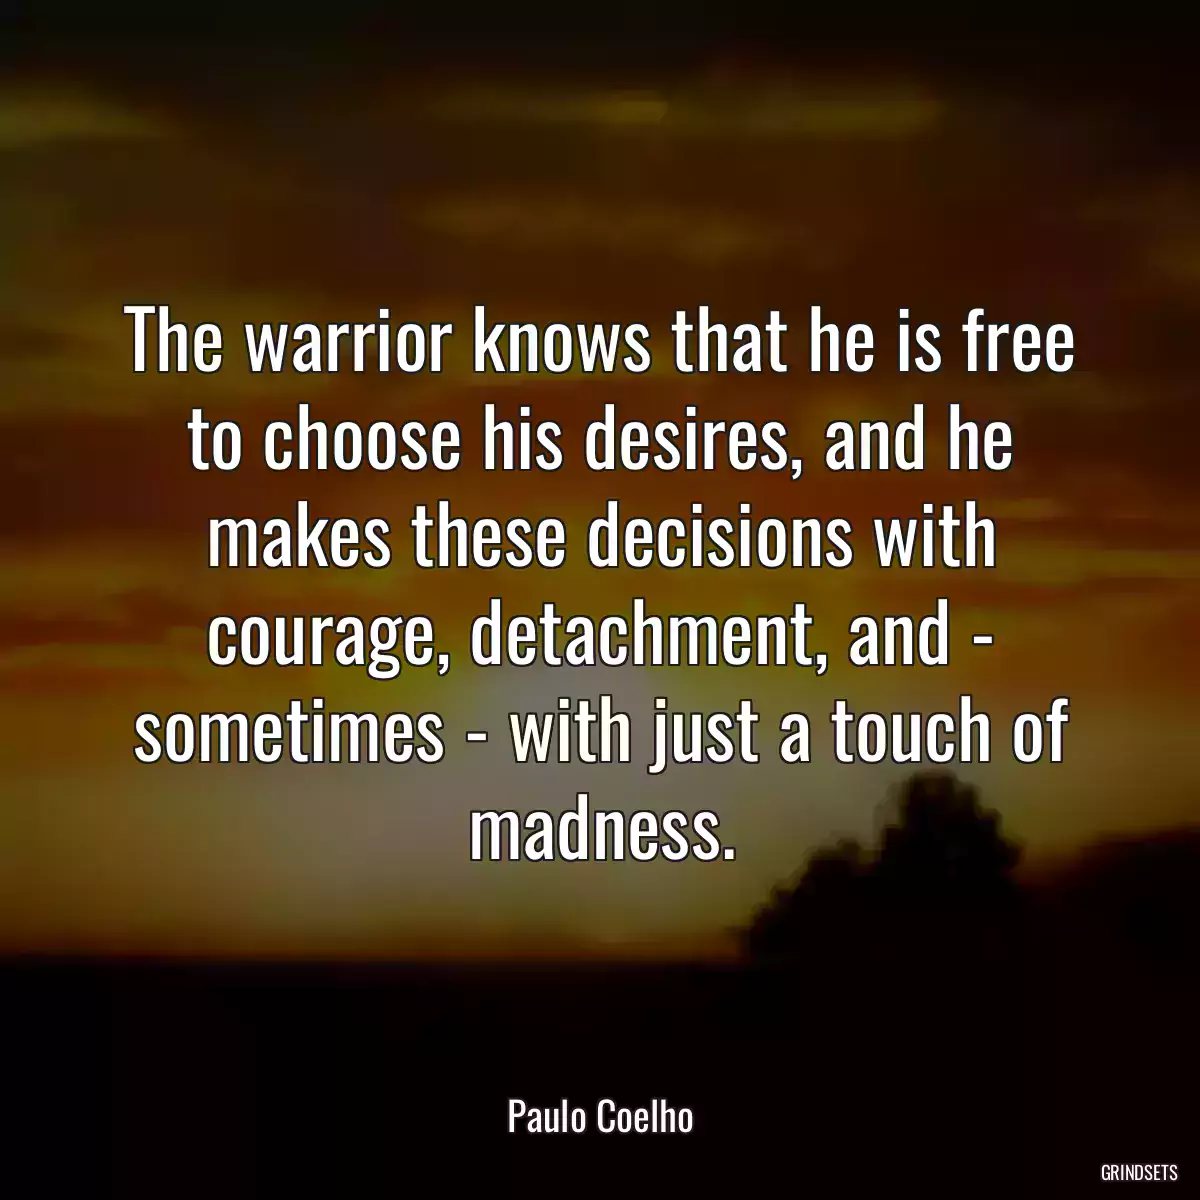 The warrior knows that he is free to choose his desires, and he makes these decisions with courage, detachment, and - sometimes - with just a touch of madness.